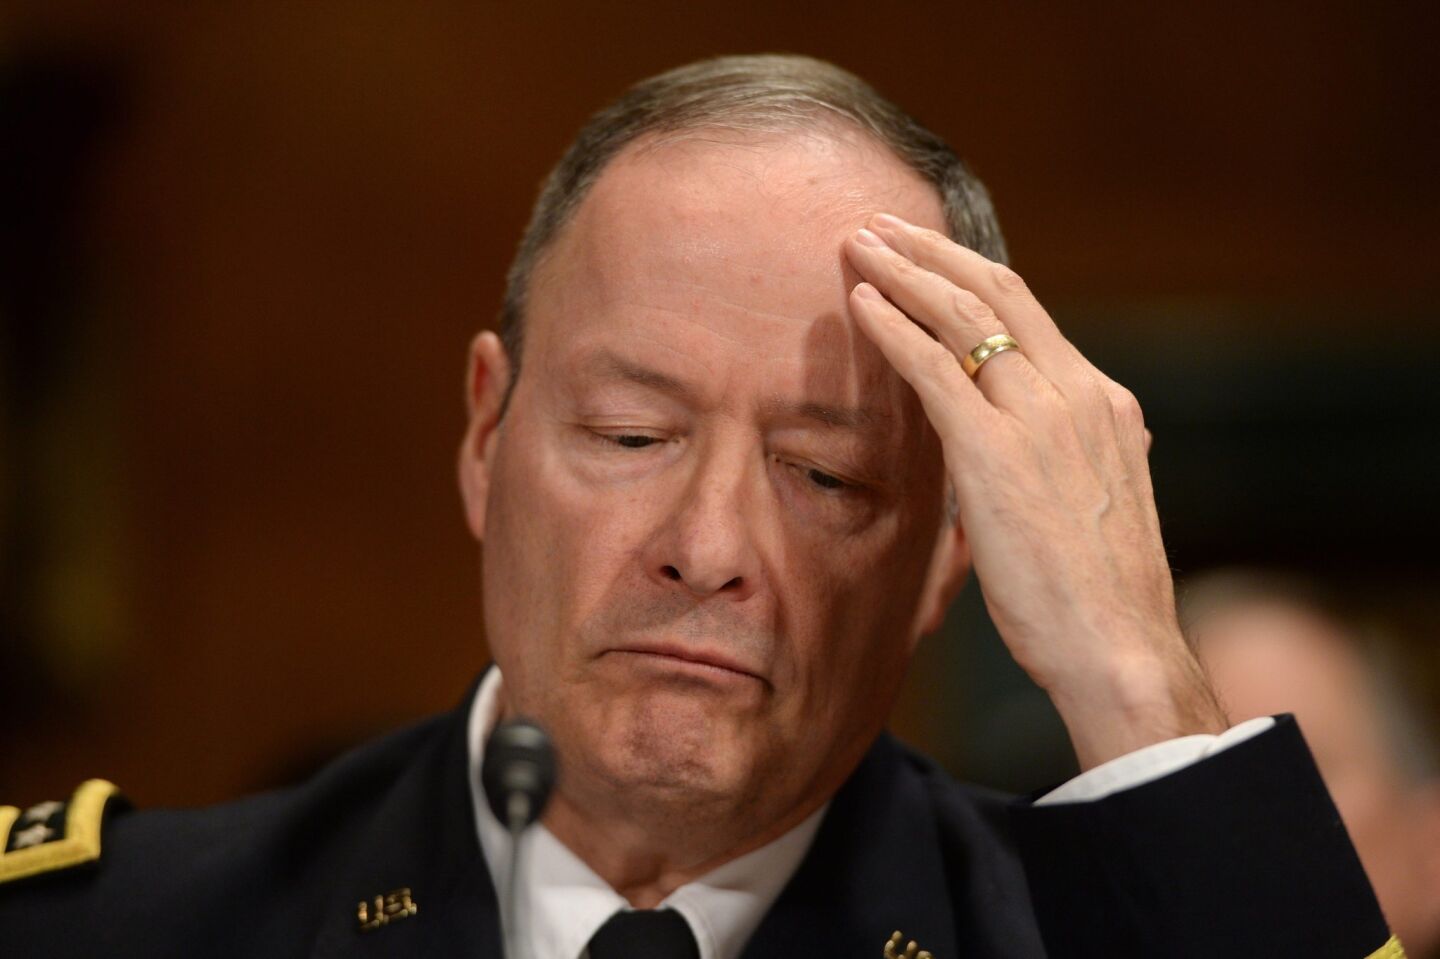 U.S. Army General Keith Alexander, director of the National Security Agency, testifies during the Senate Judiciary Committee hearing on "Continued Oversight of US Government Surveillance Authorities," on Capitol Hill.